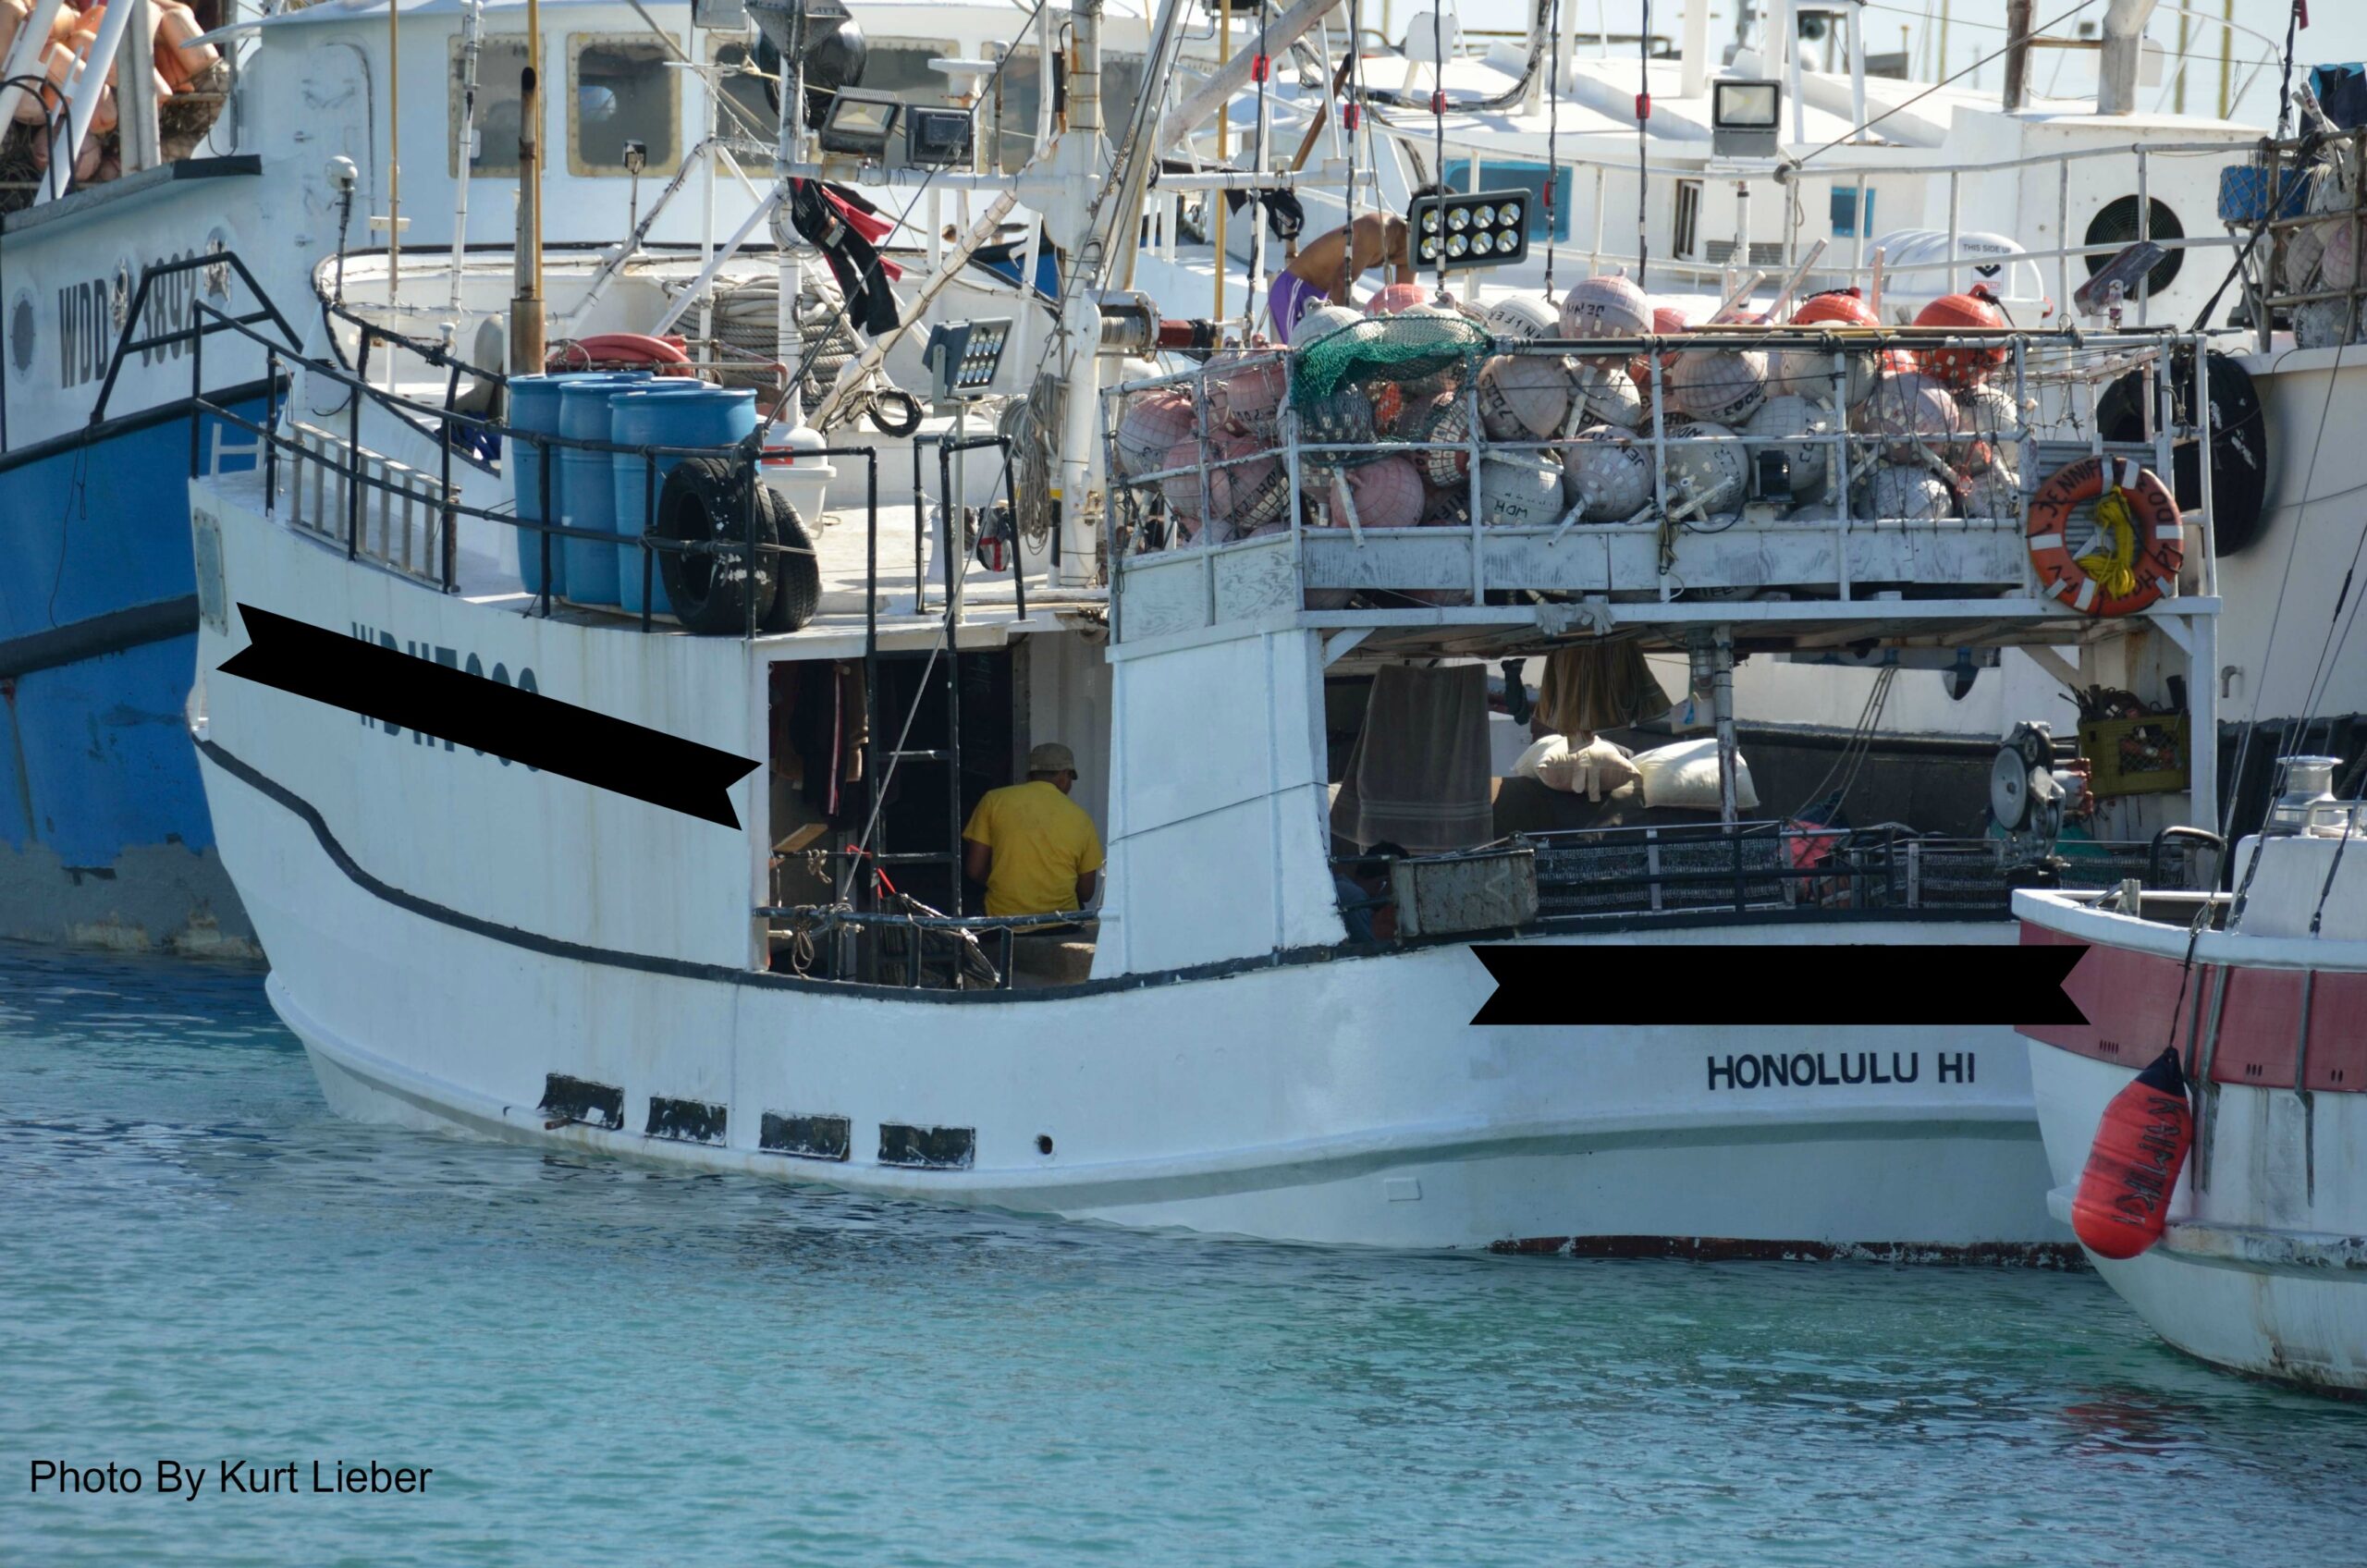 International Human Rights Complaint Filed on Behalf of Workers in Hawaii’s Longline Fishery